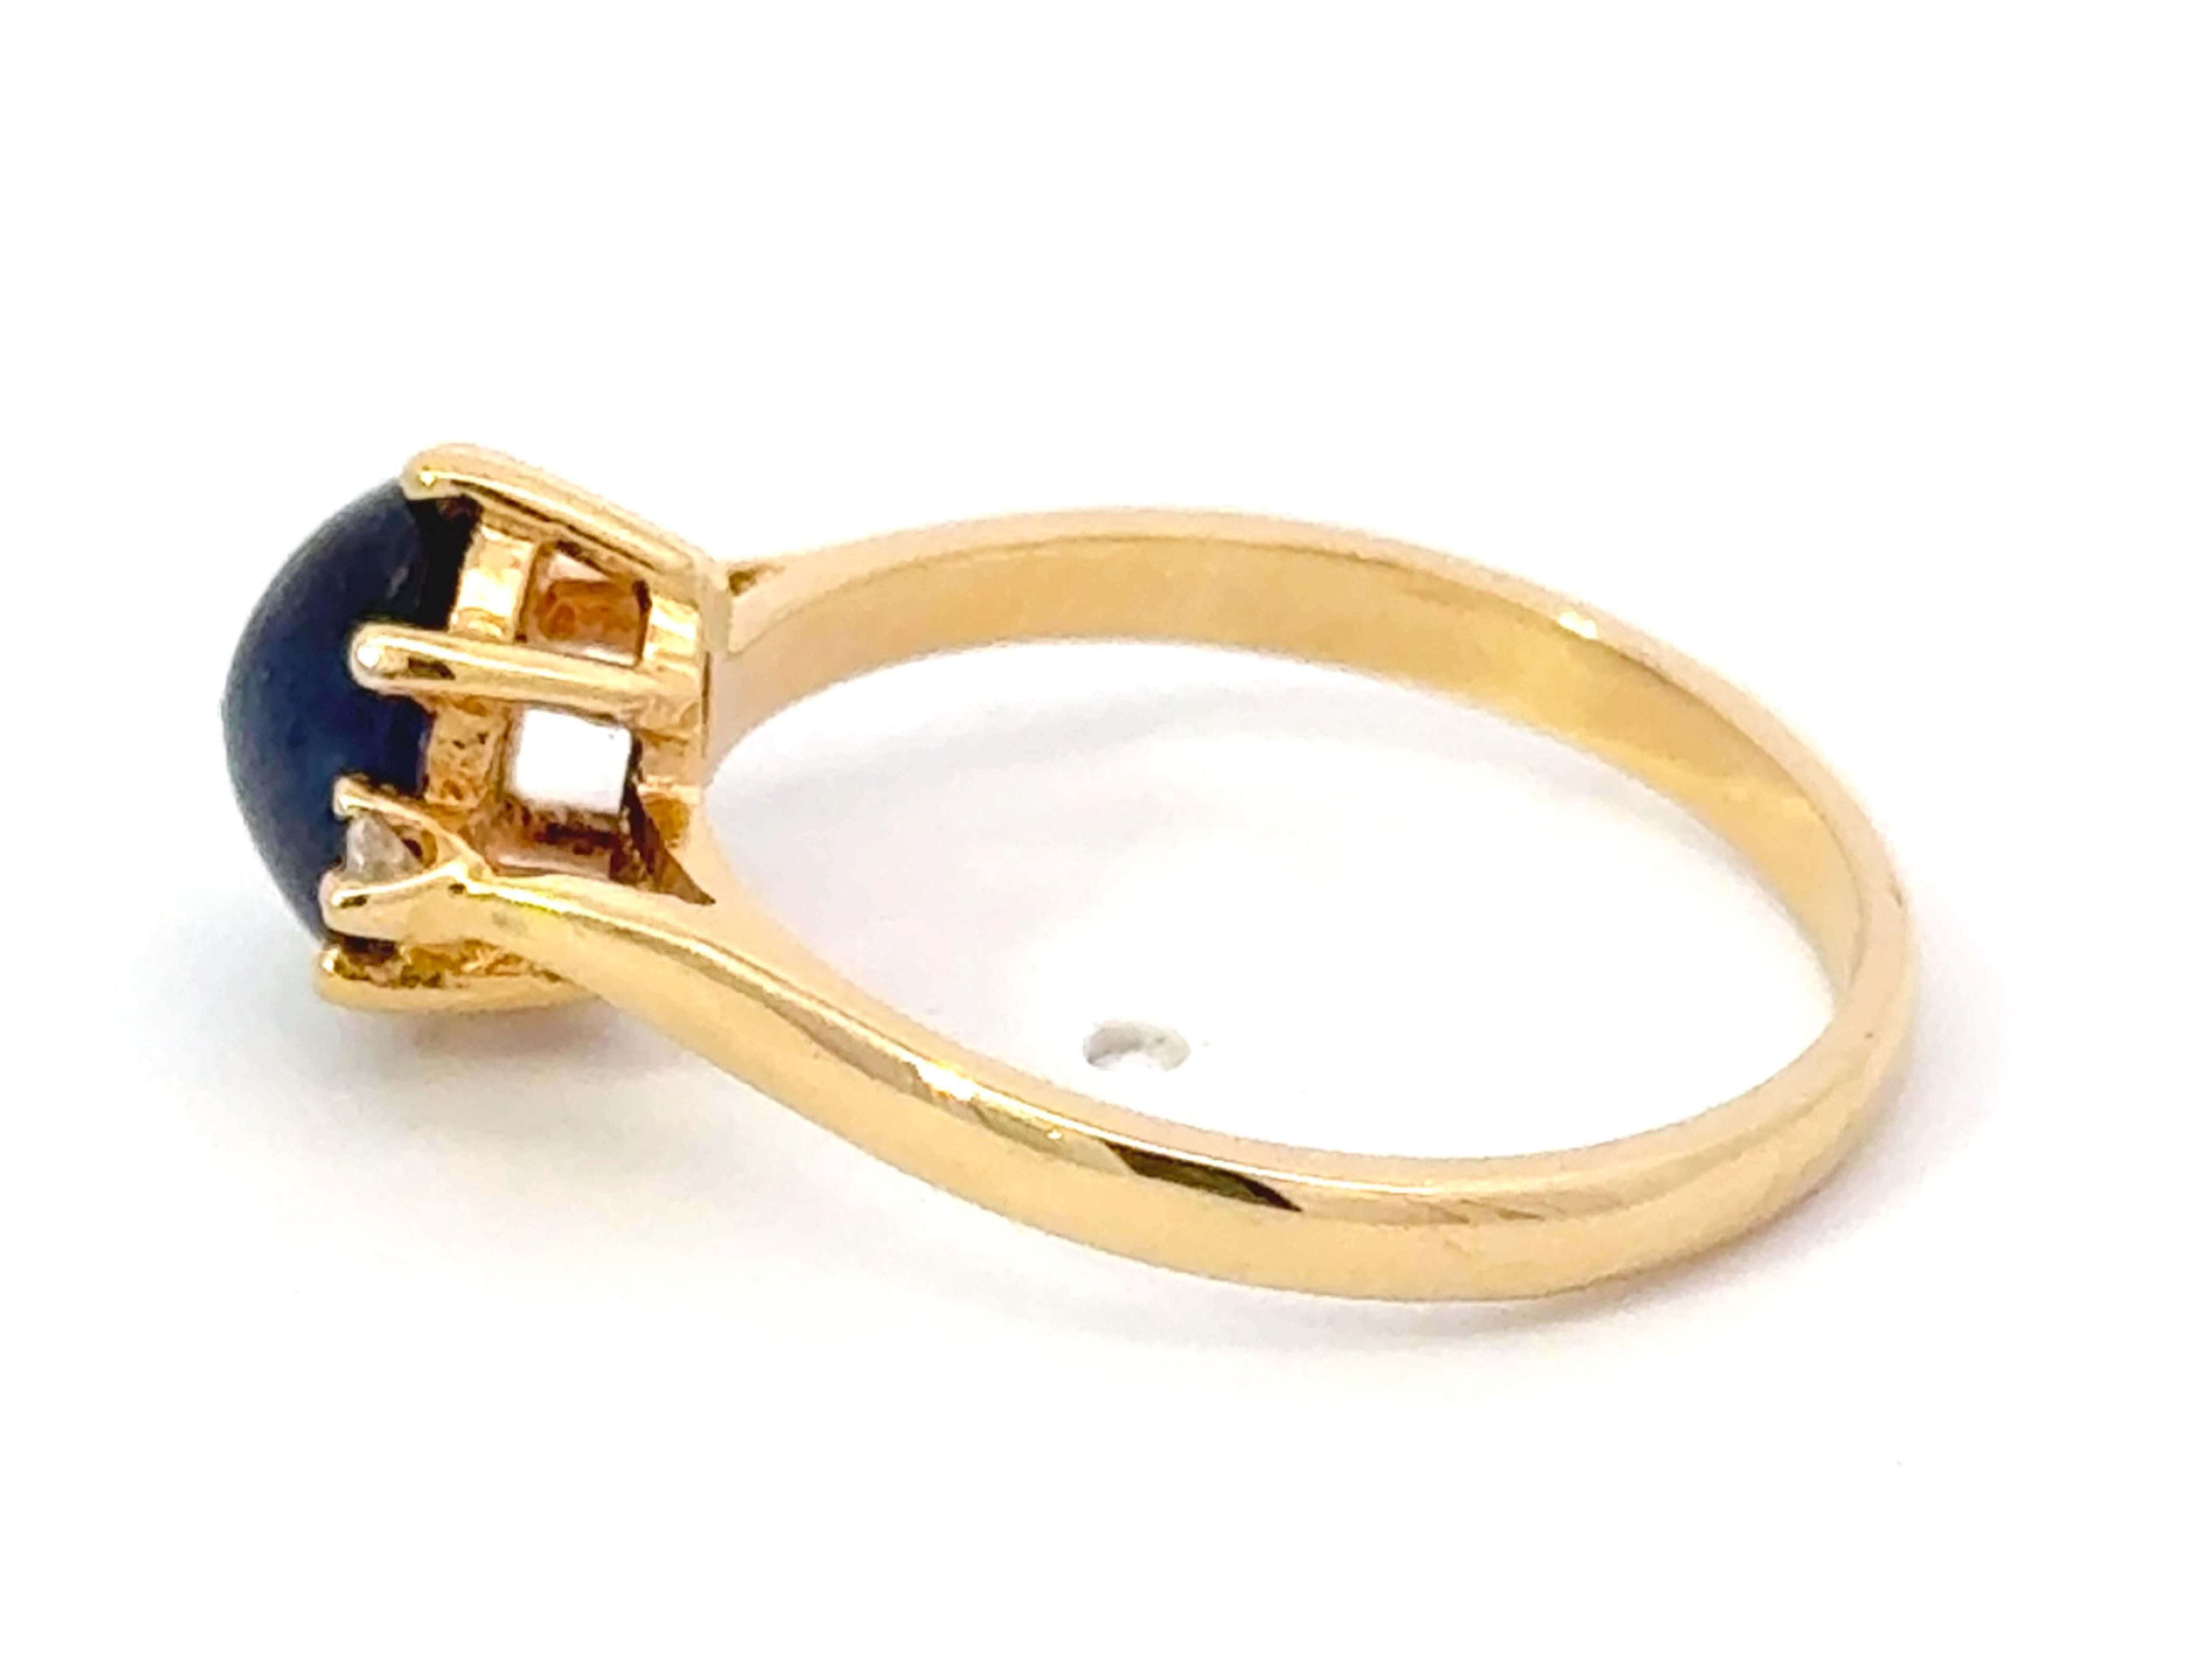 Cabochon Blue Sapphire Diamond Ring 18k Yellow Gold For Sale 1